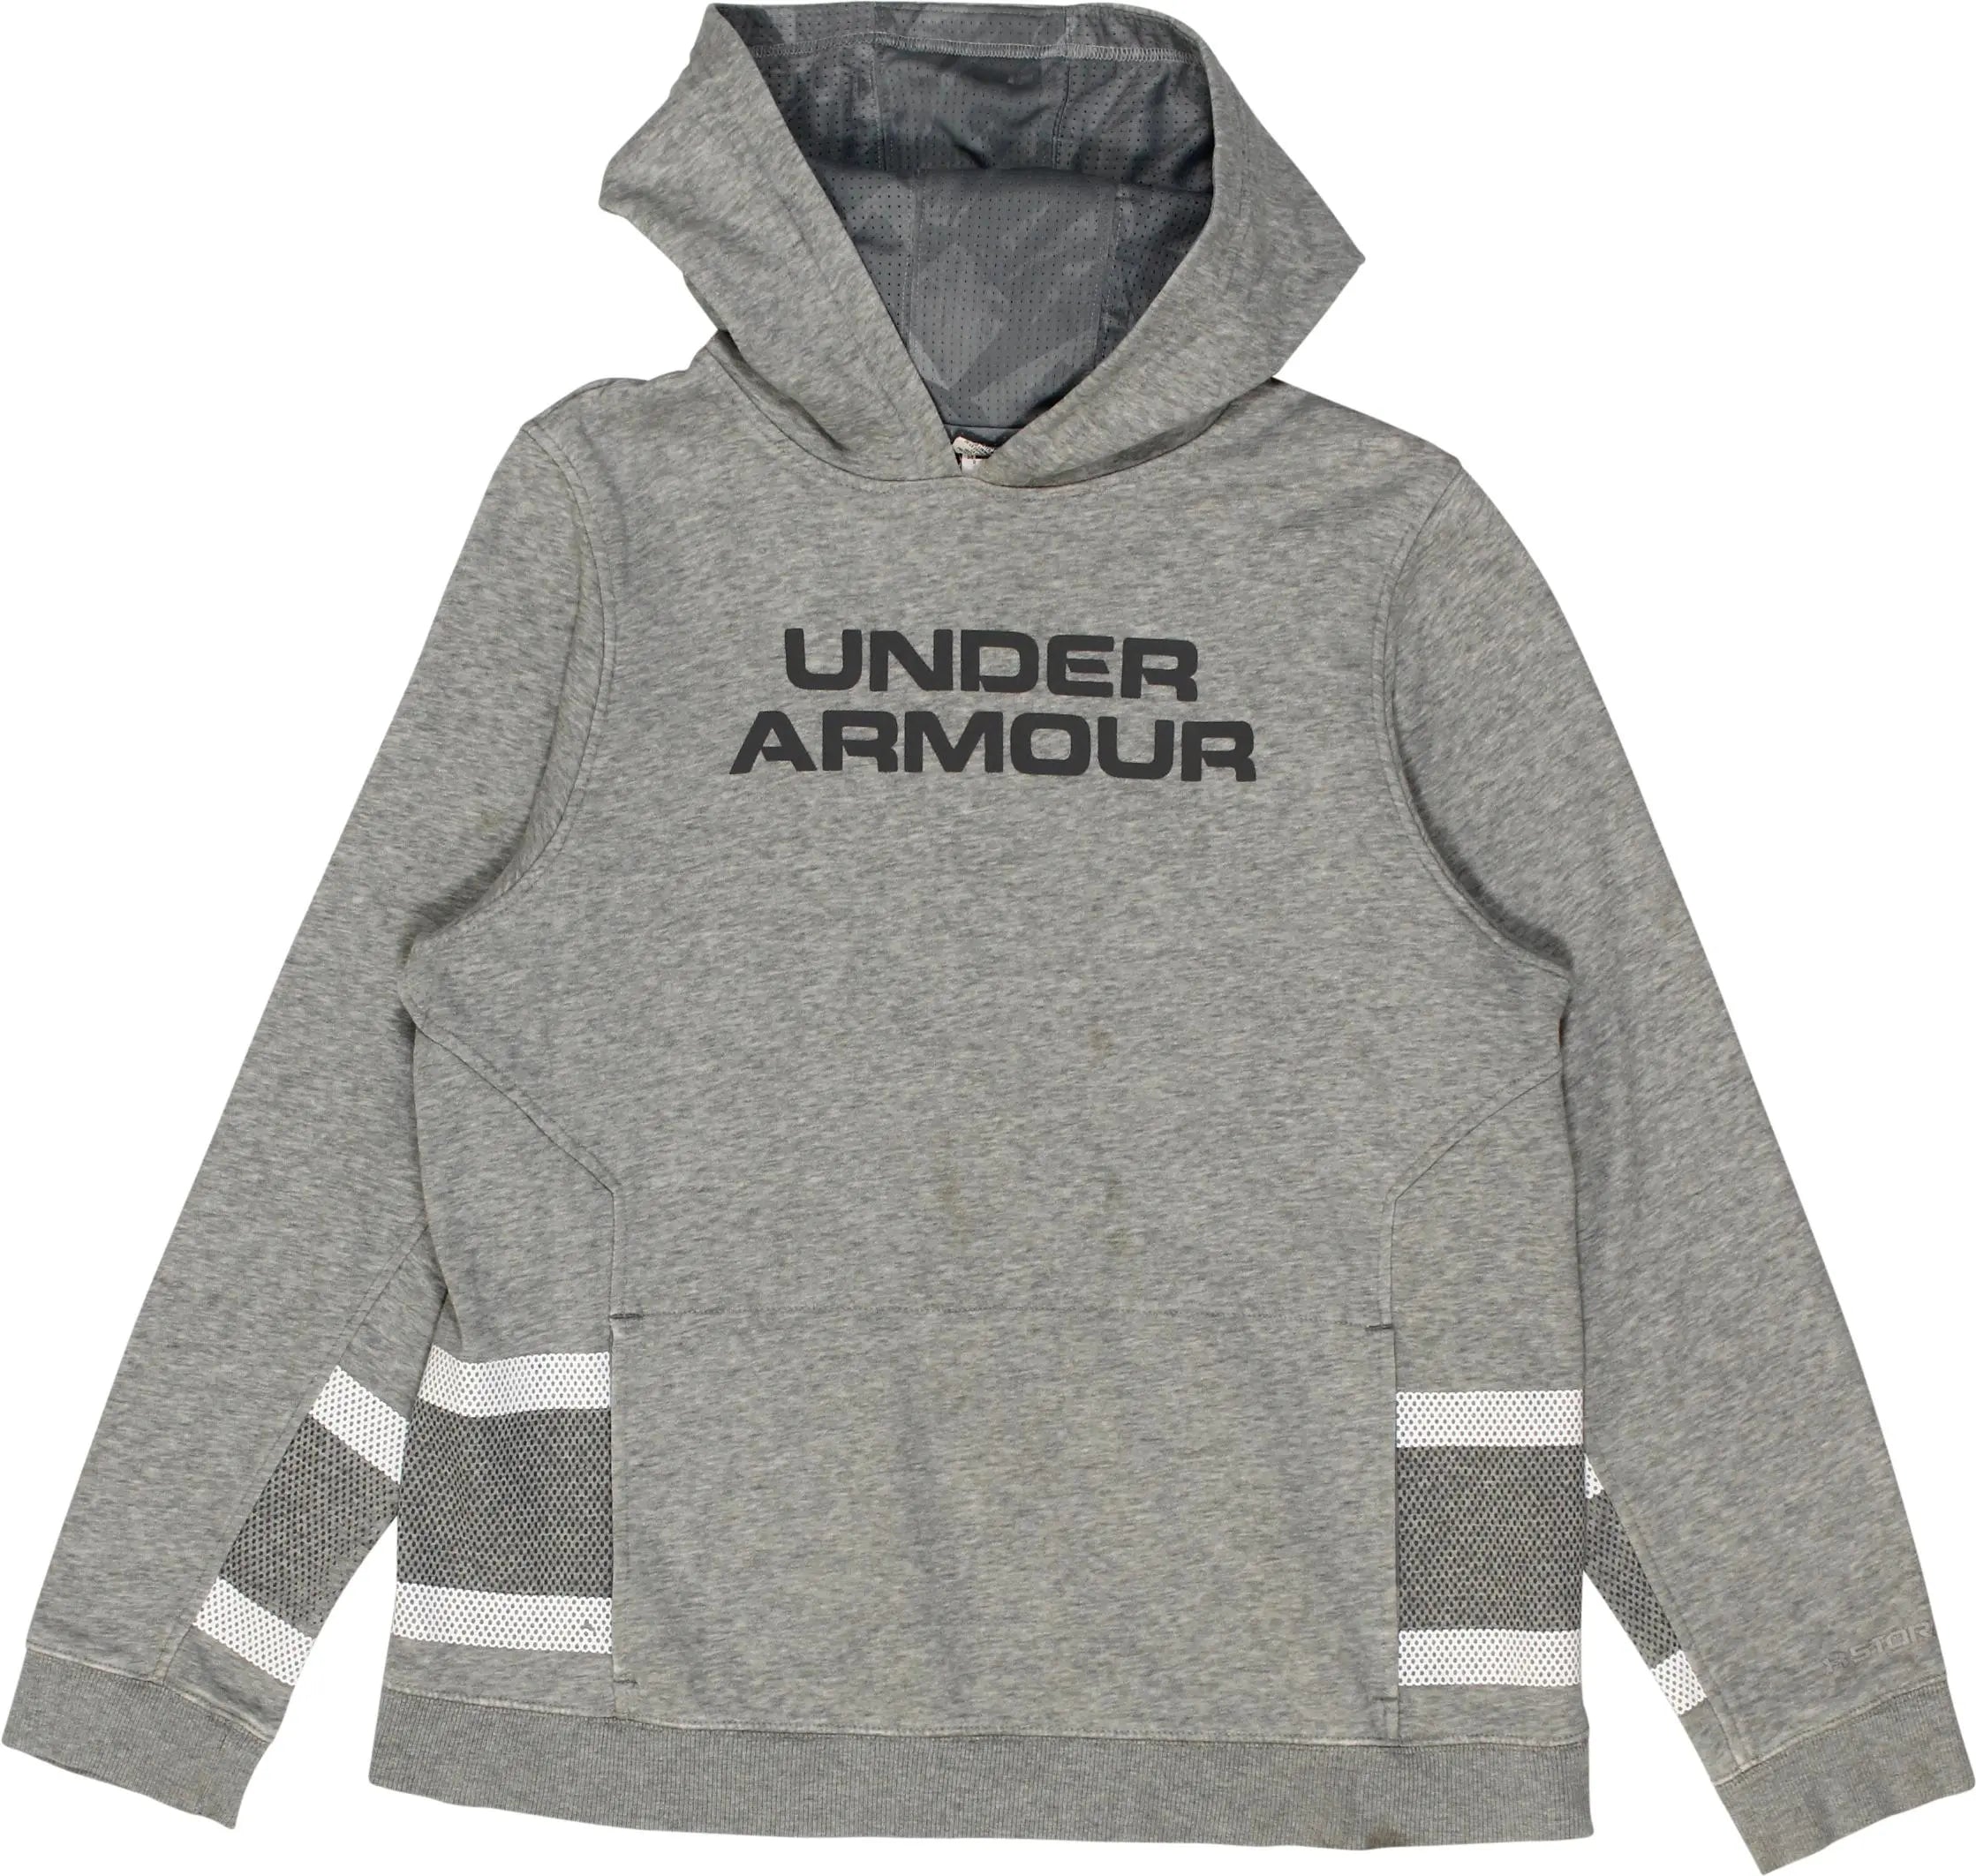 Under Armour - Under Armour Hoodie- ThriftTale.com - Vintage and second handclothing